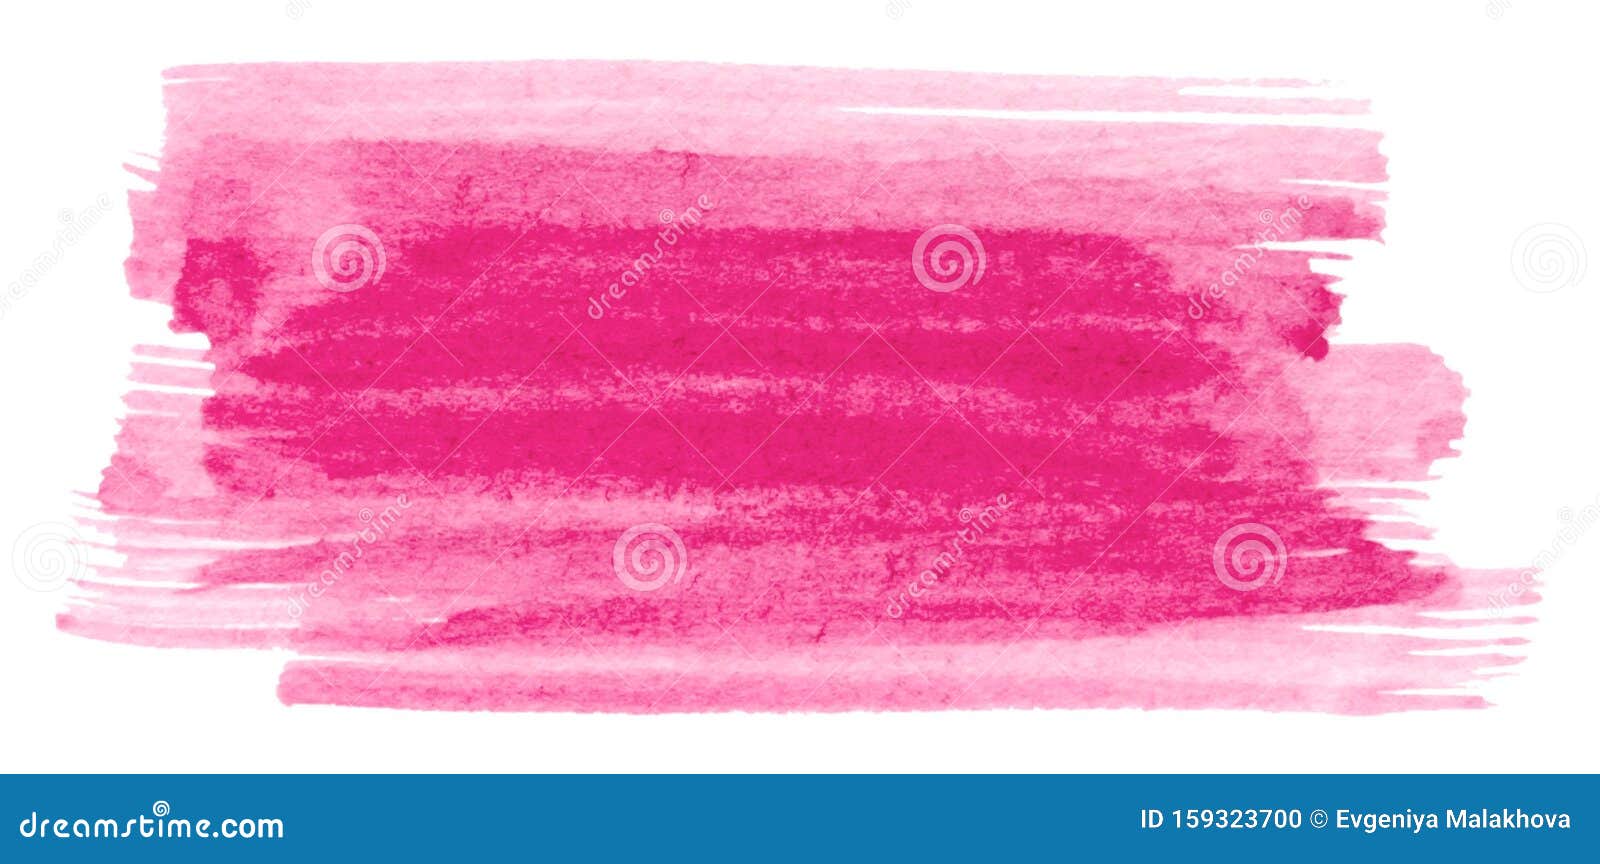 Vector Pink Paint Brush Stroke Texture Isolated on White - Watercolor ...